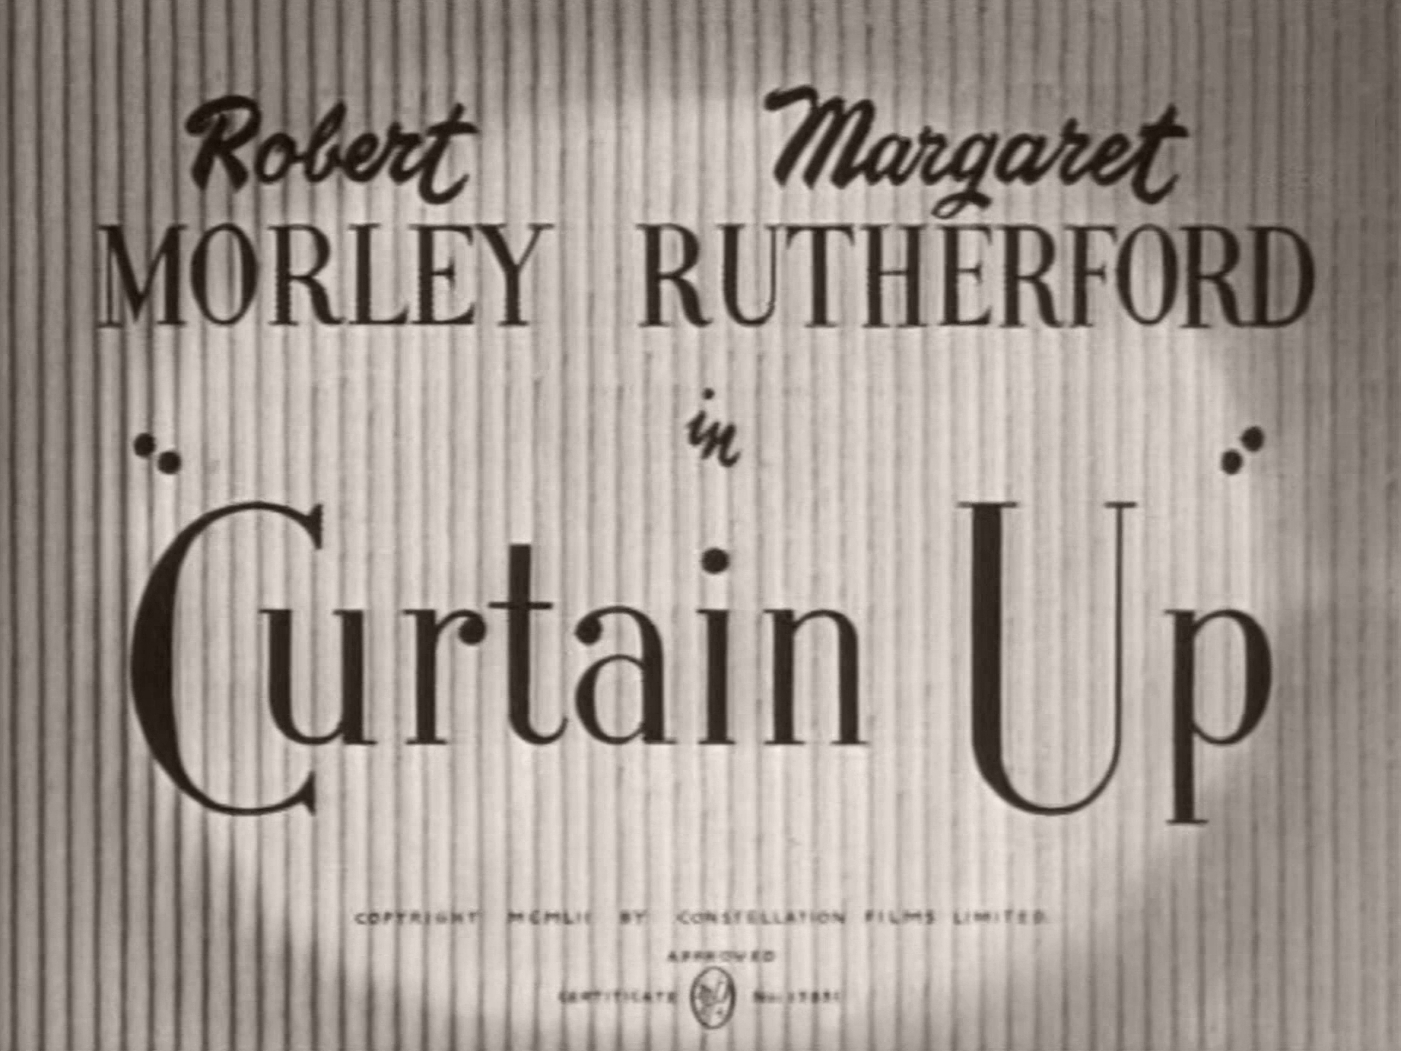 Main title from Curtain Up (1952) (3). Robert Morley Margaret Rutherford in ‘Curtain Up’